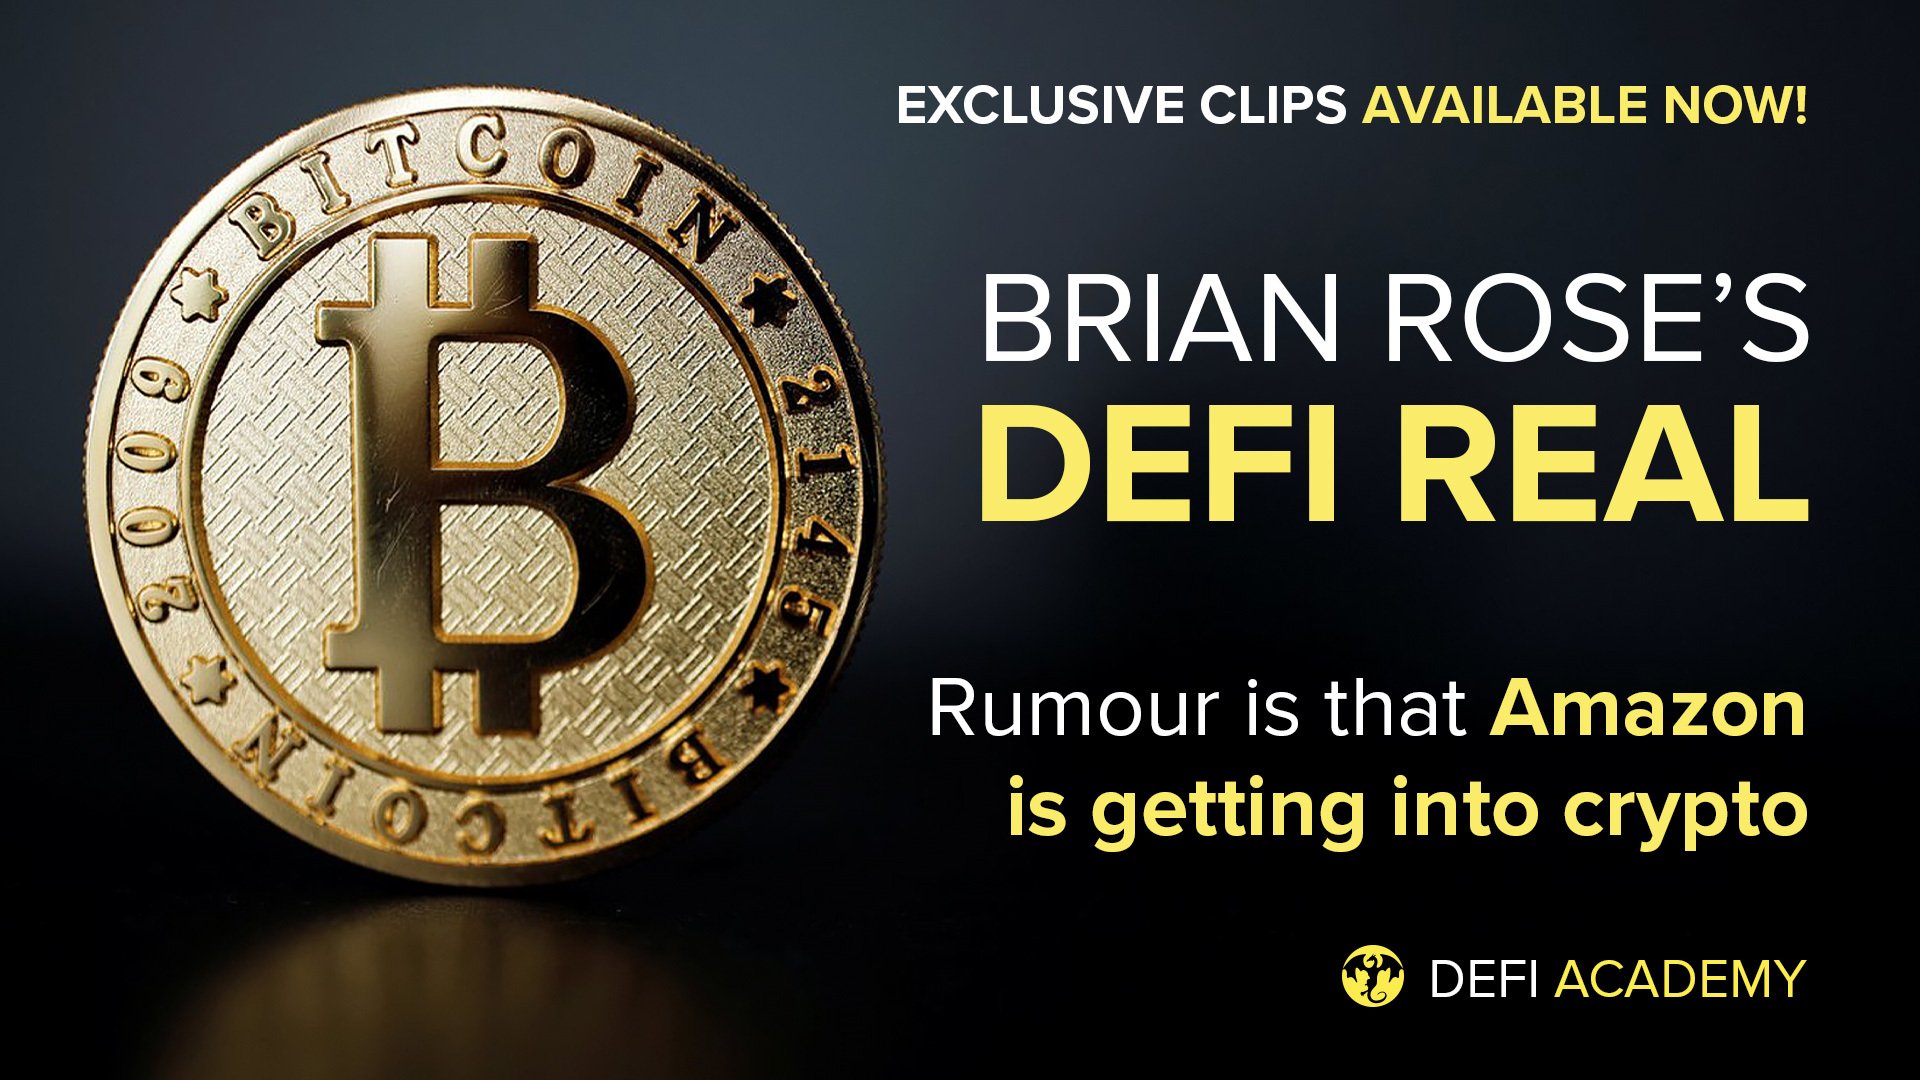 DeFi Real - Rumour Is Amazon Is Getting Into Crypto